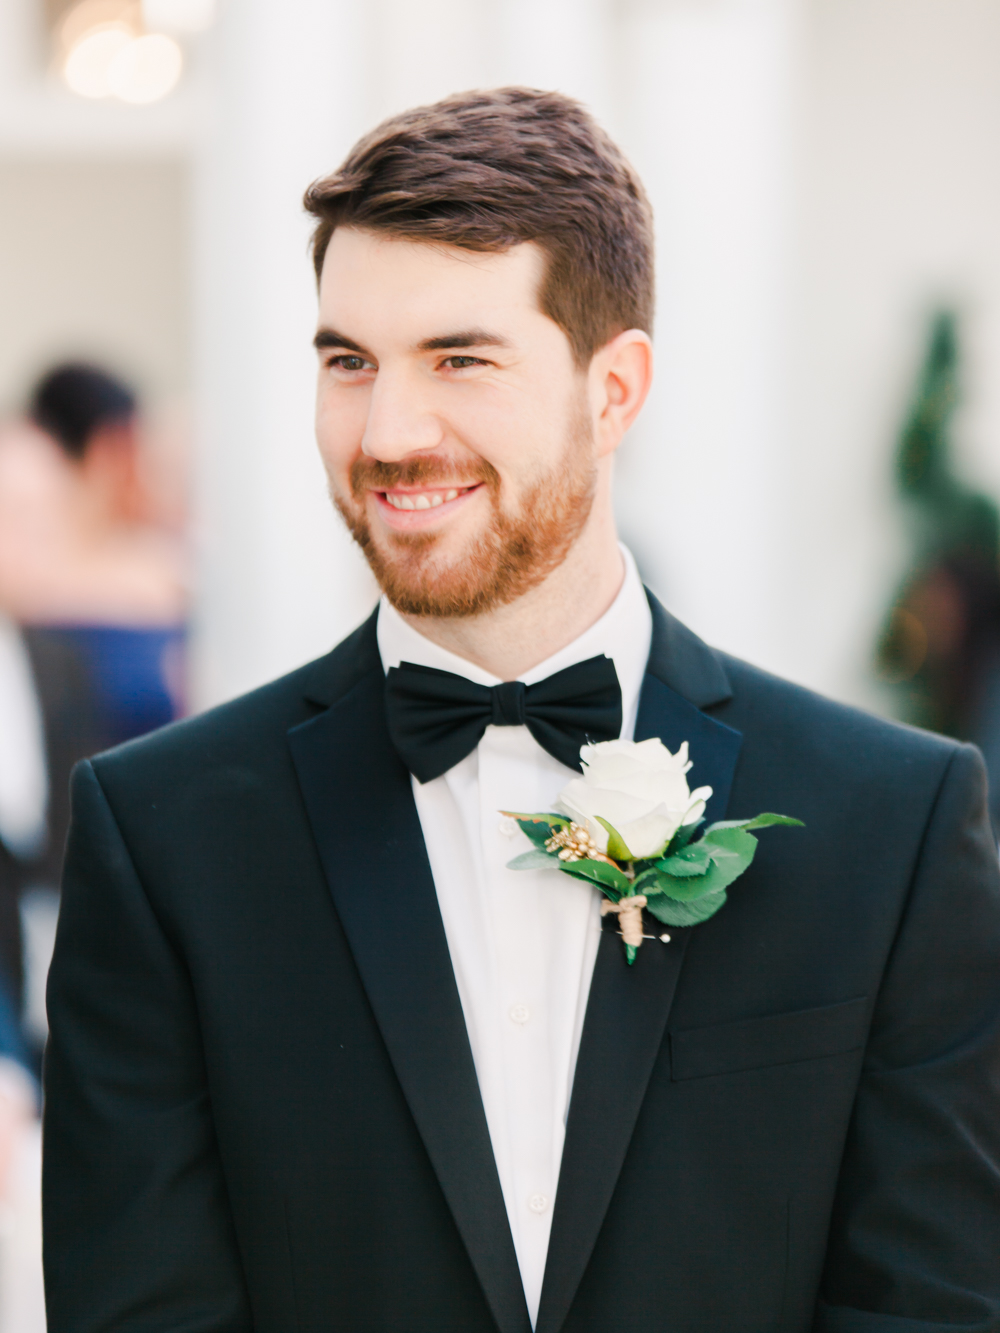 Groom waits for his bride wearing dinner jacket and black bow tie